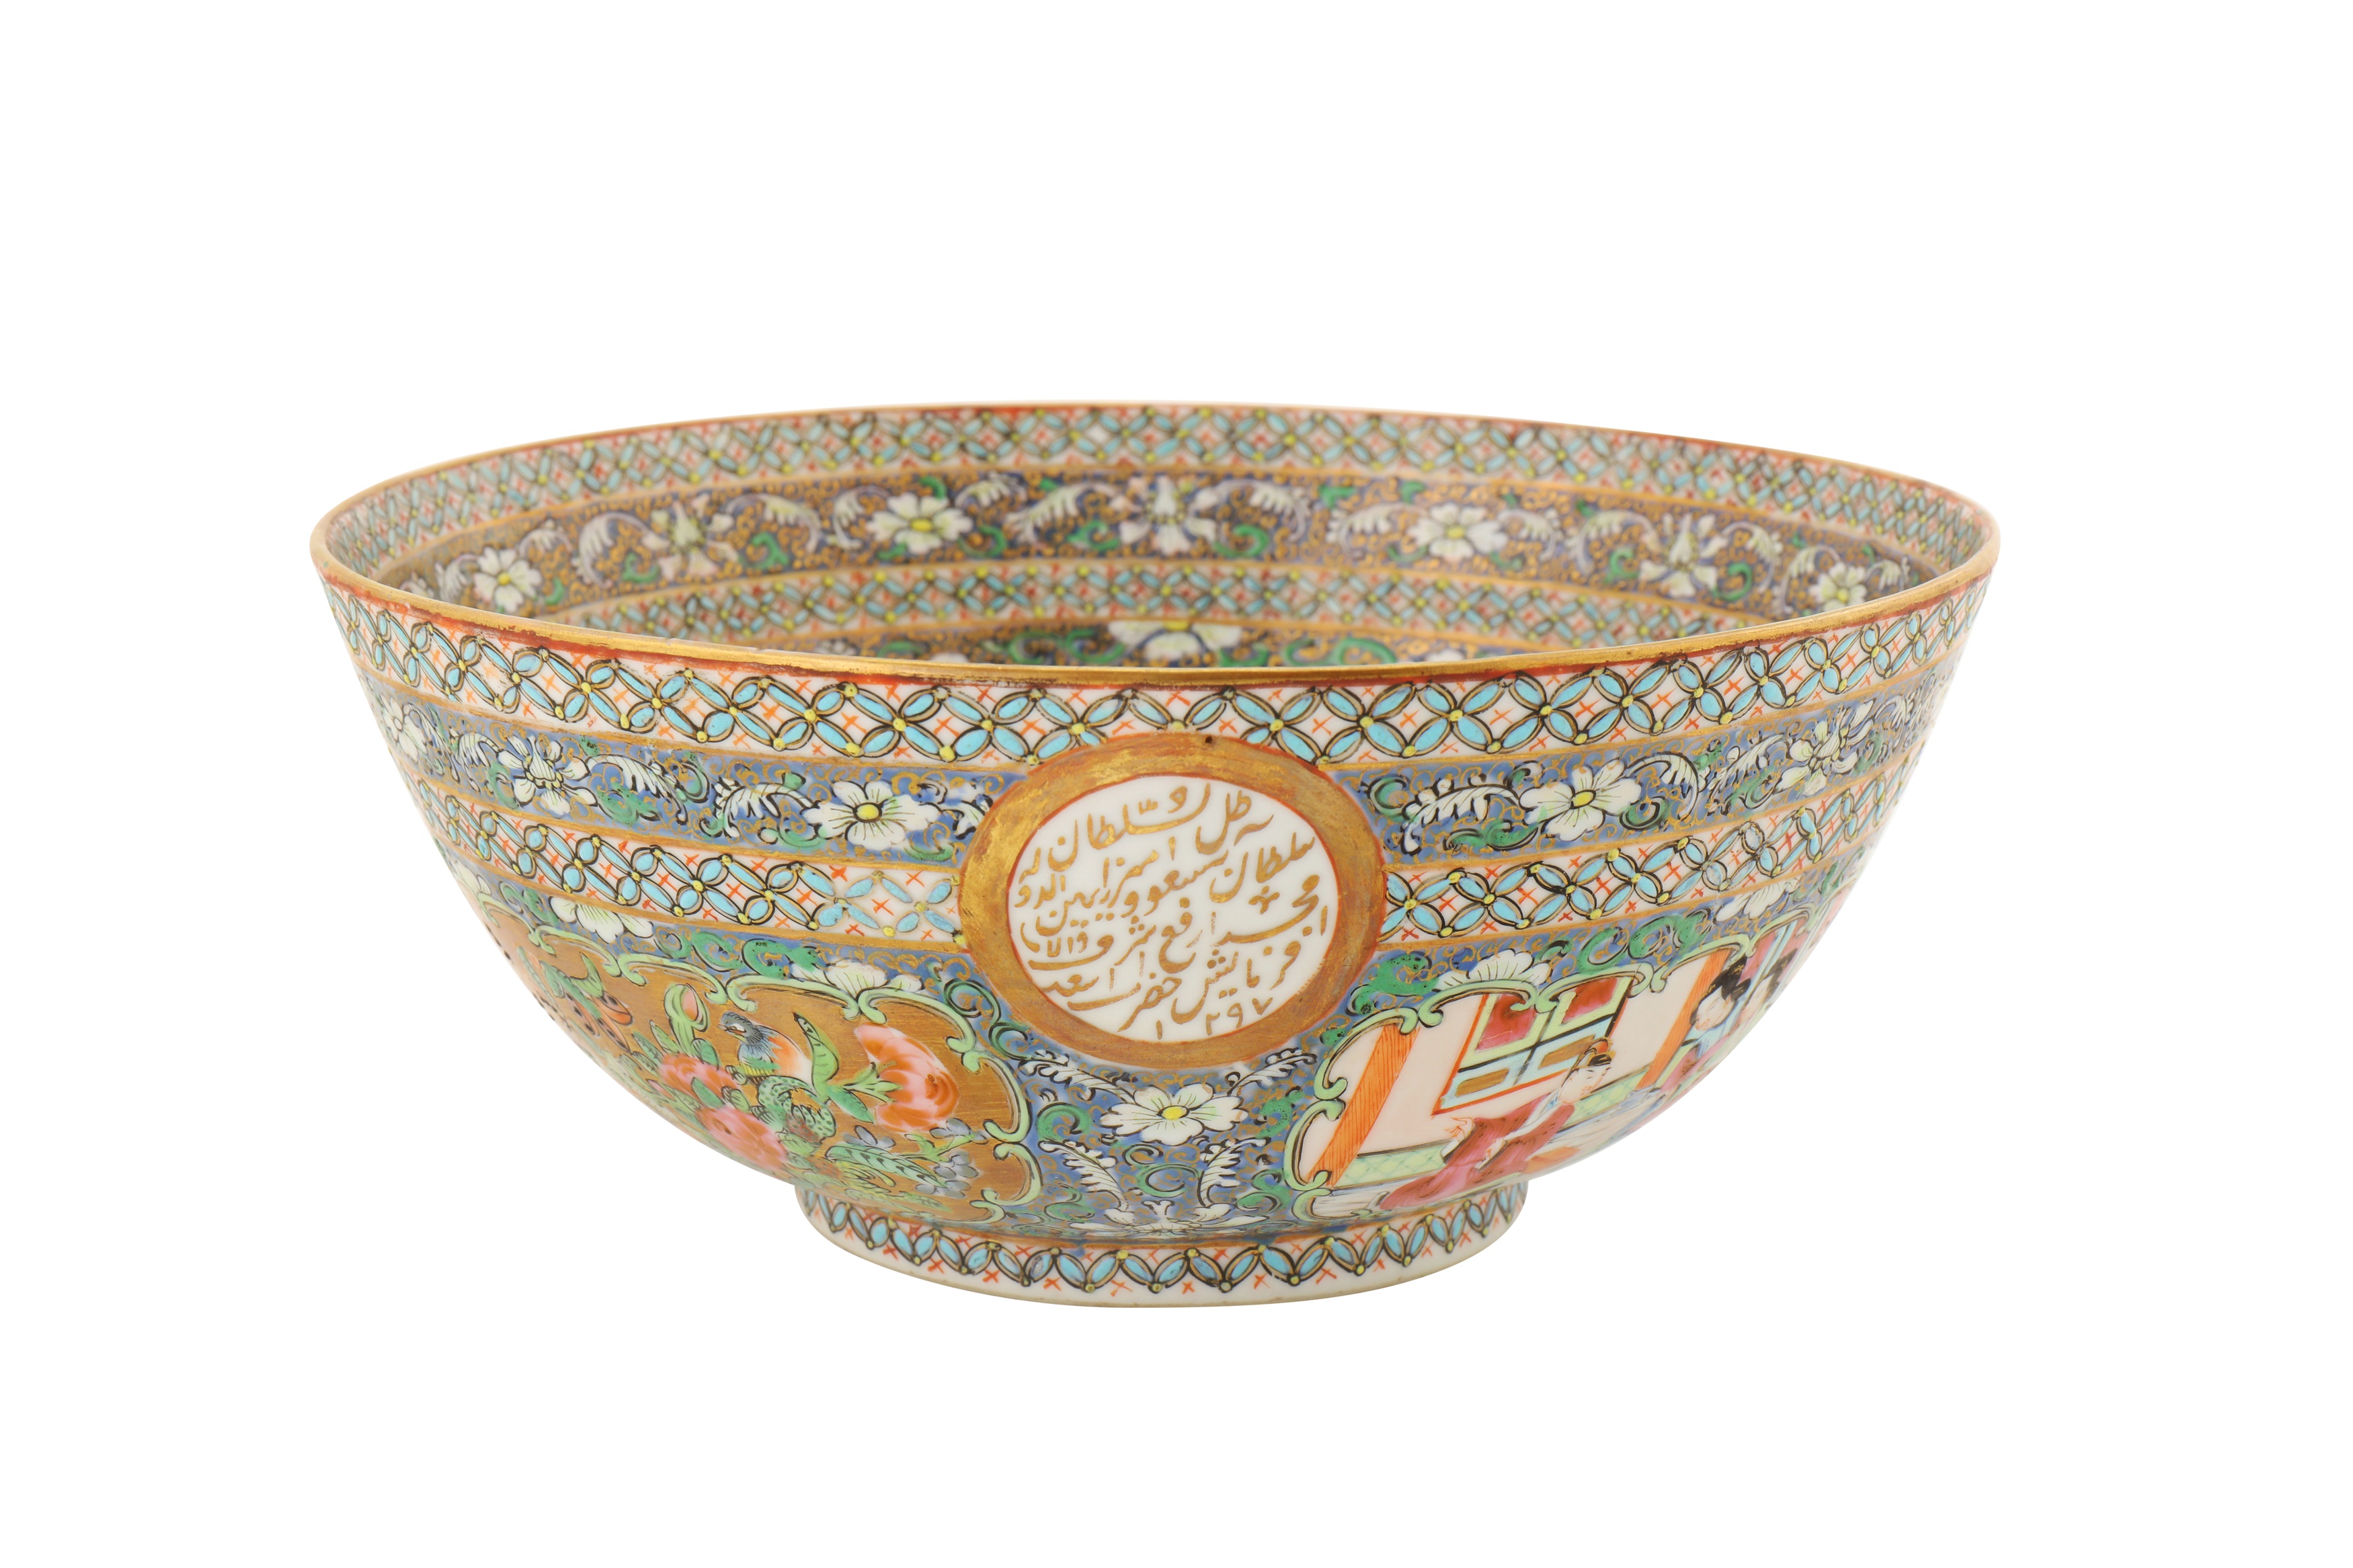 A MEDIUM SIZED BOWL AND DISH FROM THE ZILL AL-SULTAN CANTON PORCELAIN SERVICE - Image 4 of 8